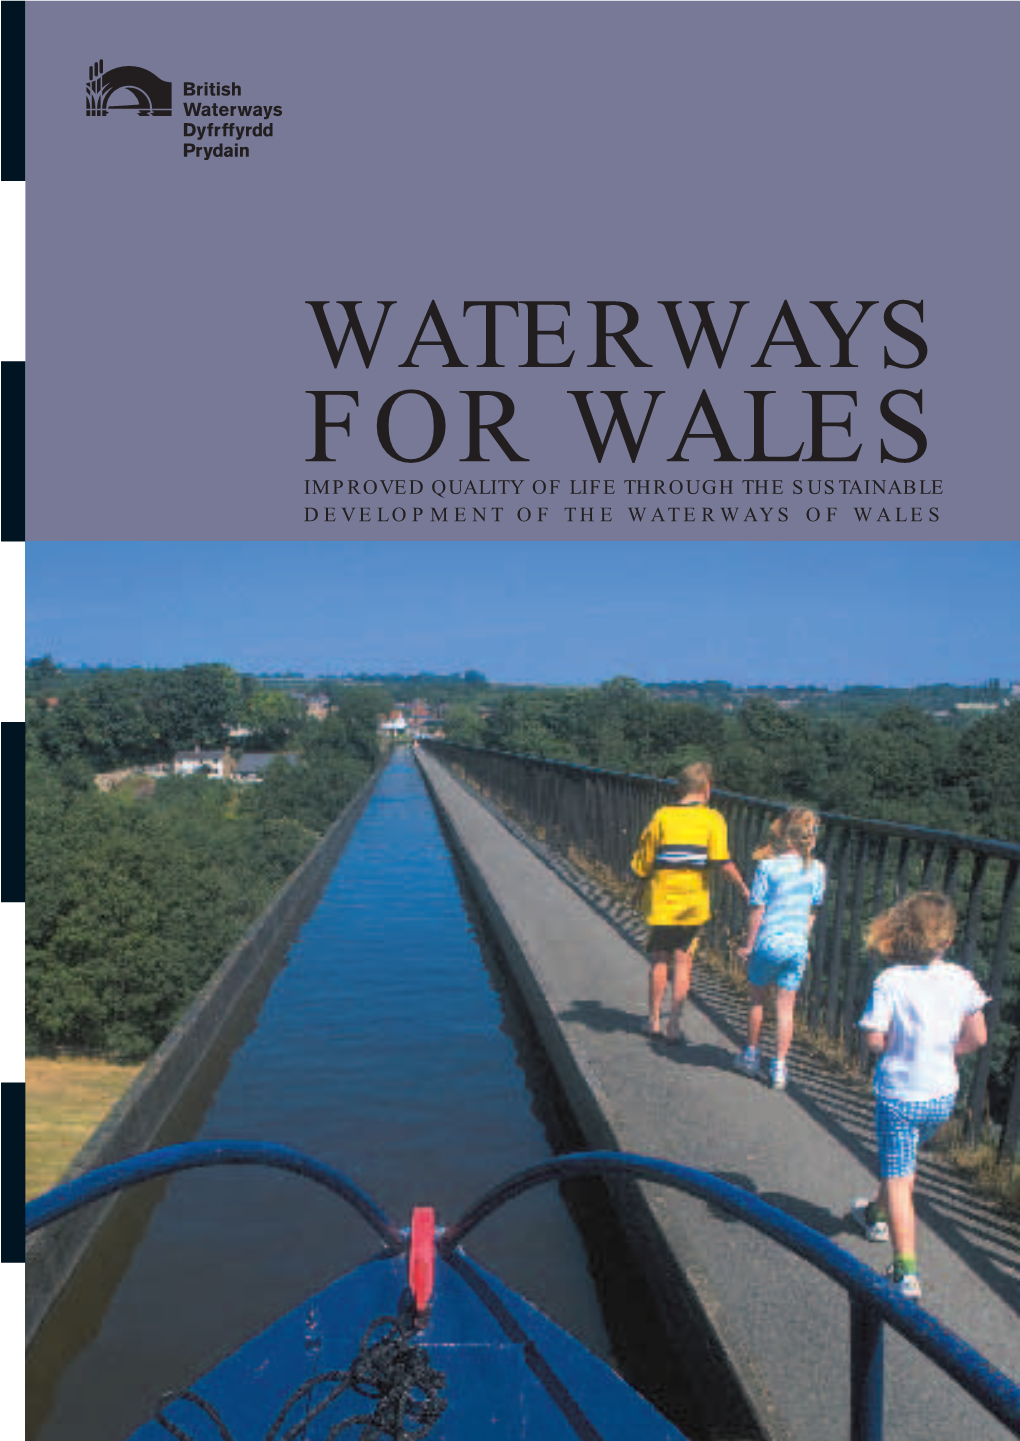 Waterways for Wales